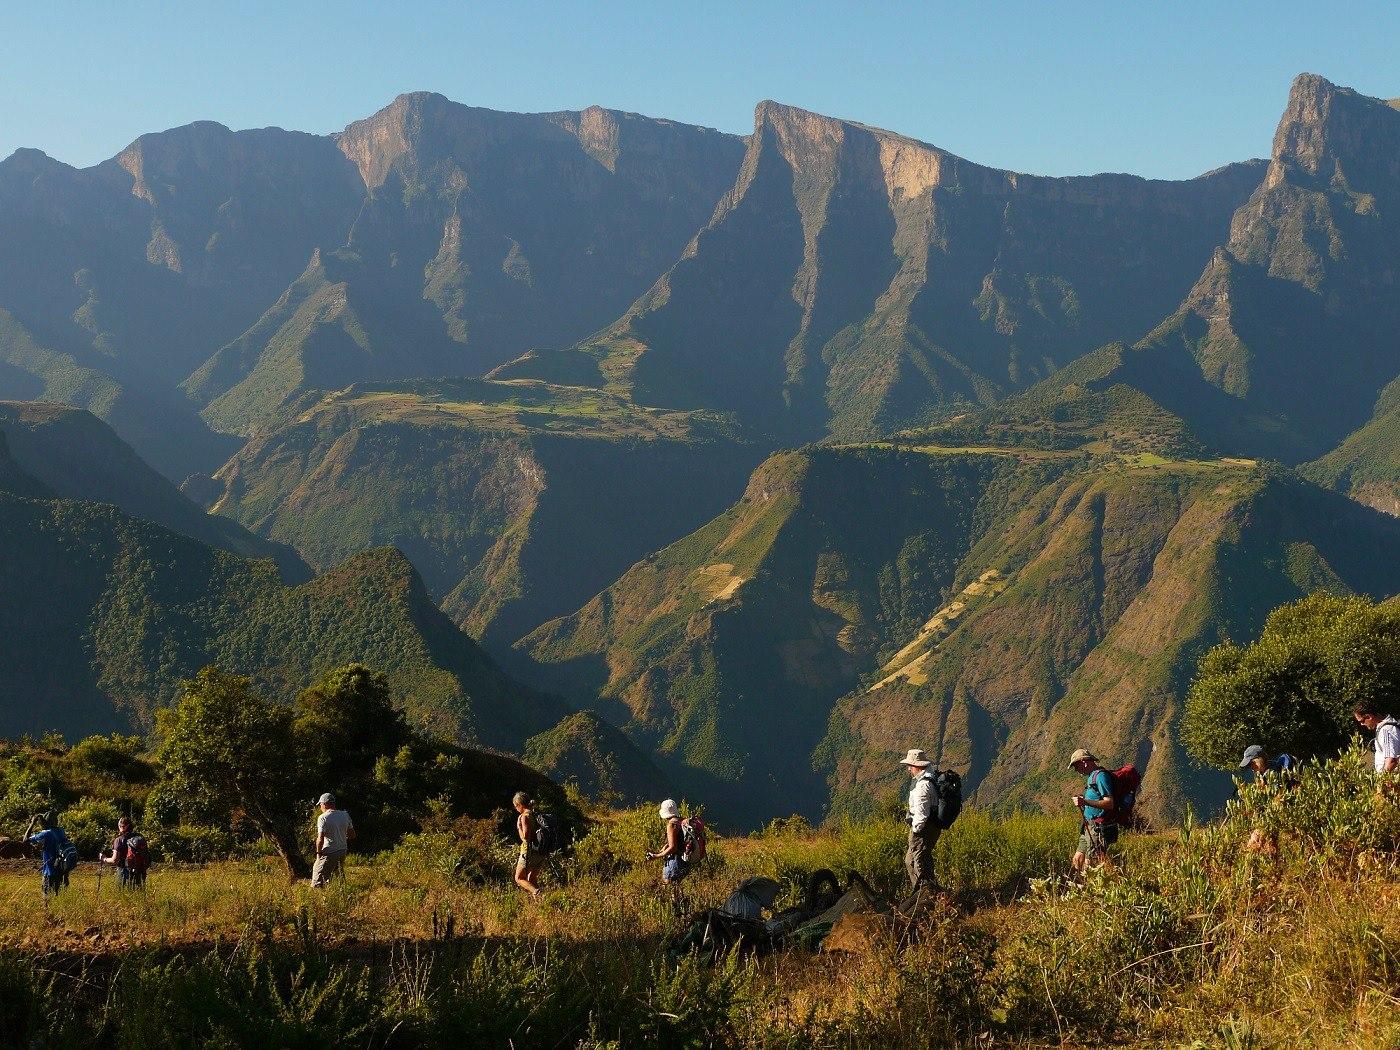 Trekking through the Simien Mountains National Park is spectacular, but trails are overused